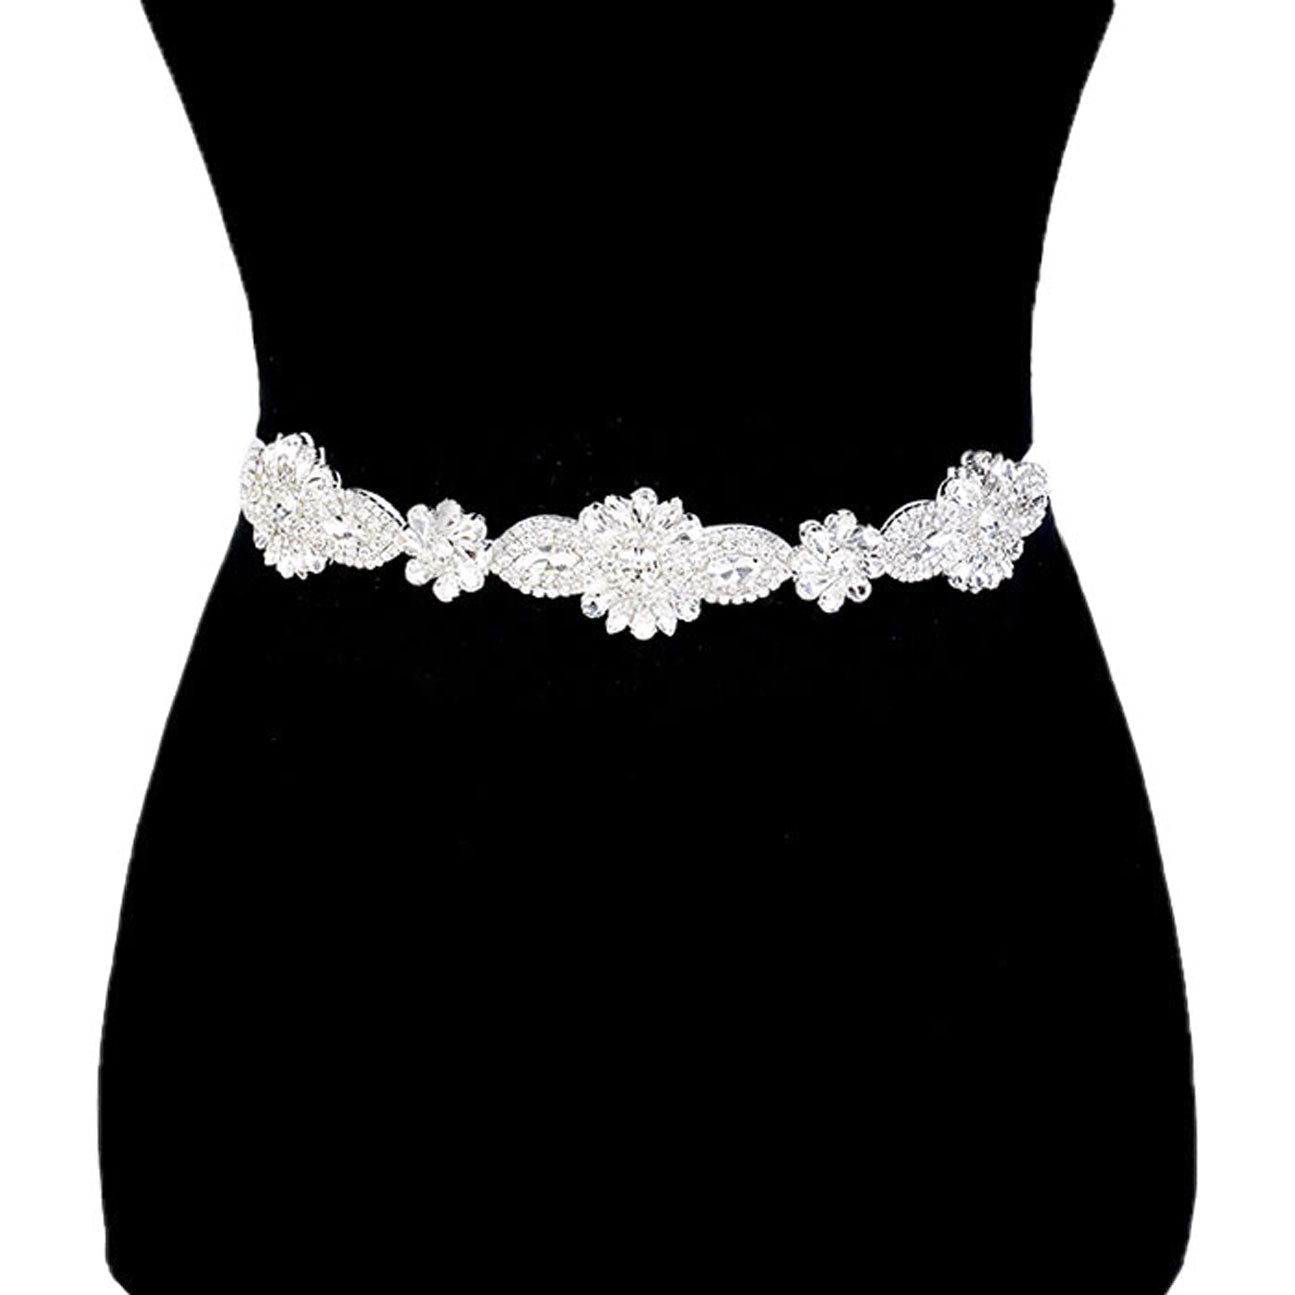 Clear Silver White Floral Crystal Sash Ribbon Bridal Wedding Belts Headband. A timeless selection, this sparkling rhinestone, Bridal Belt, Rhinestone Belt, Bridal Belt Sash, Wedding Belt is exceptionally elegant, adding an exquisite detail to your wedding dress or tie it on your hair for a glamorous to any outfit.